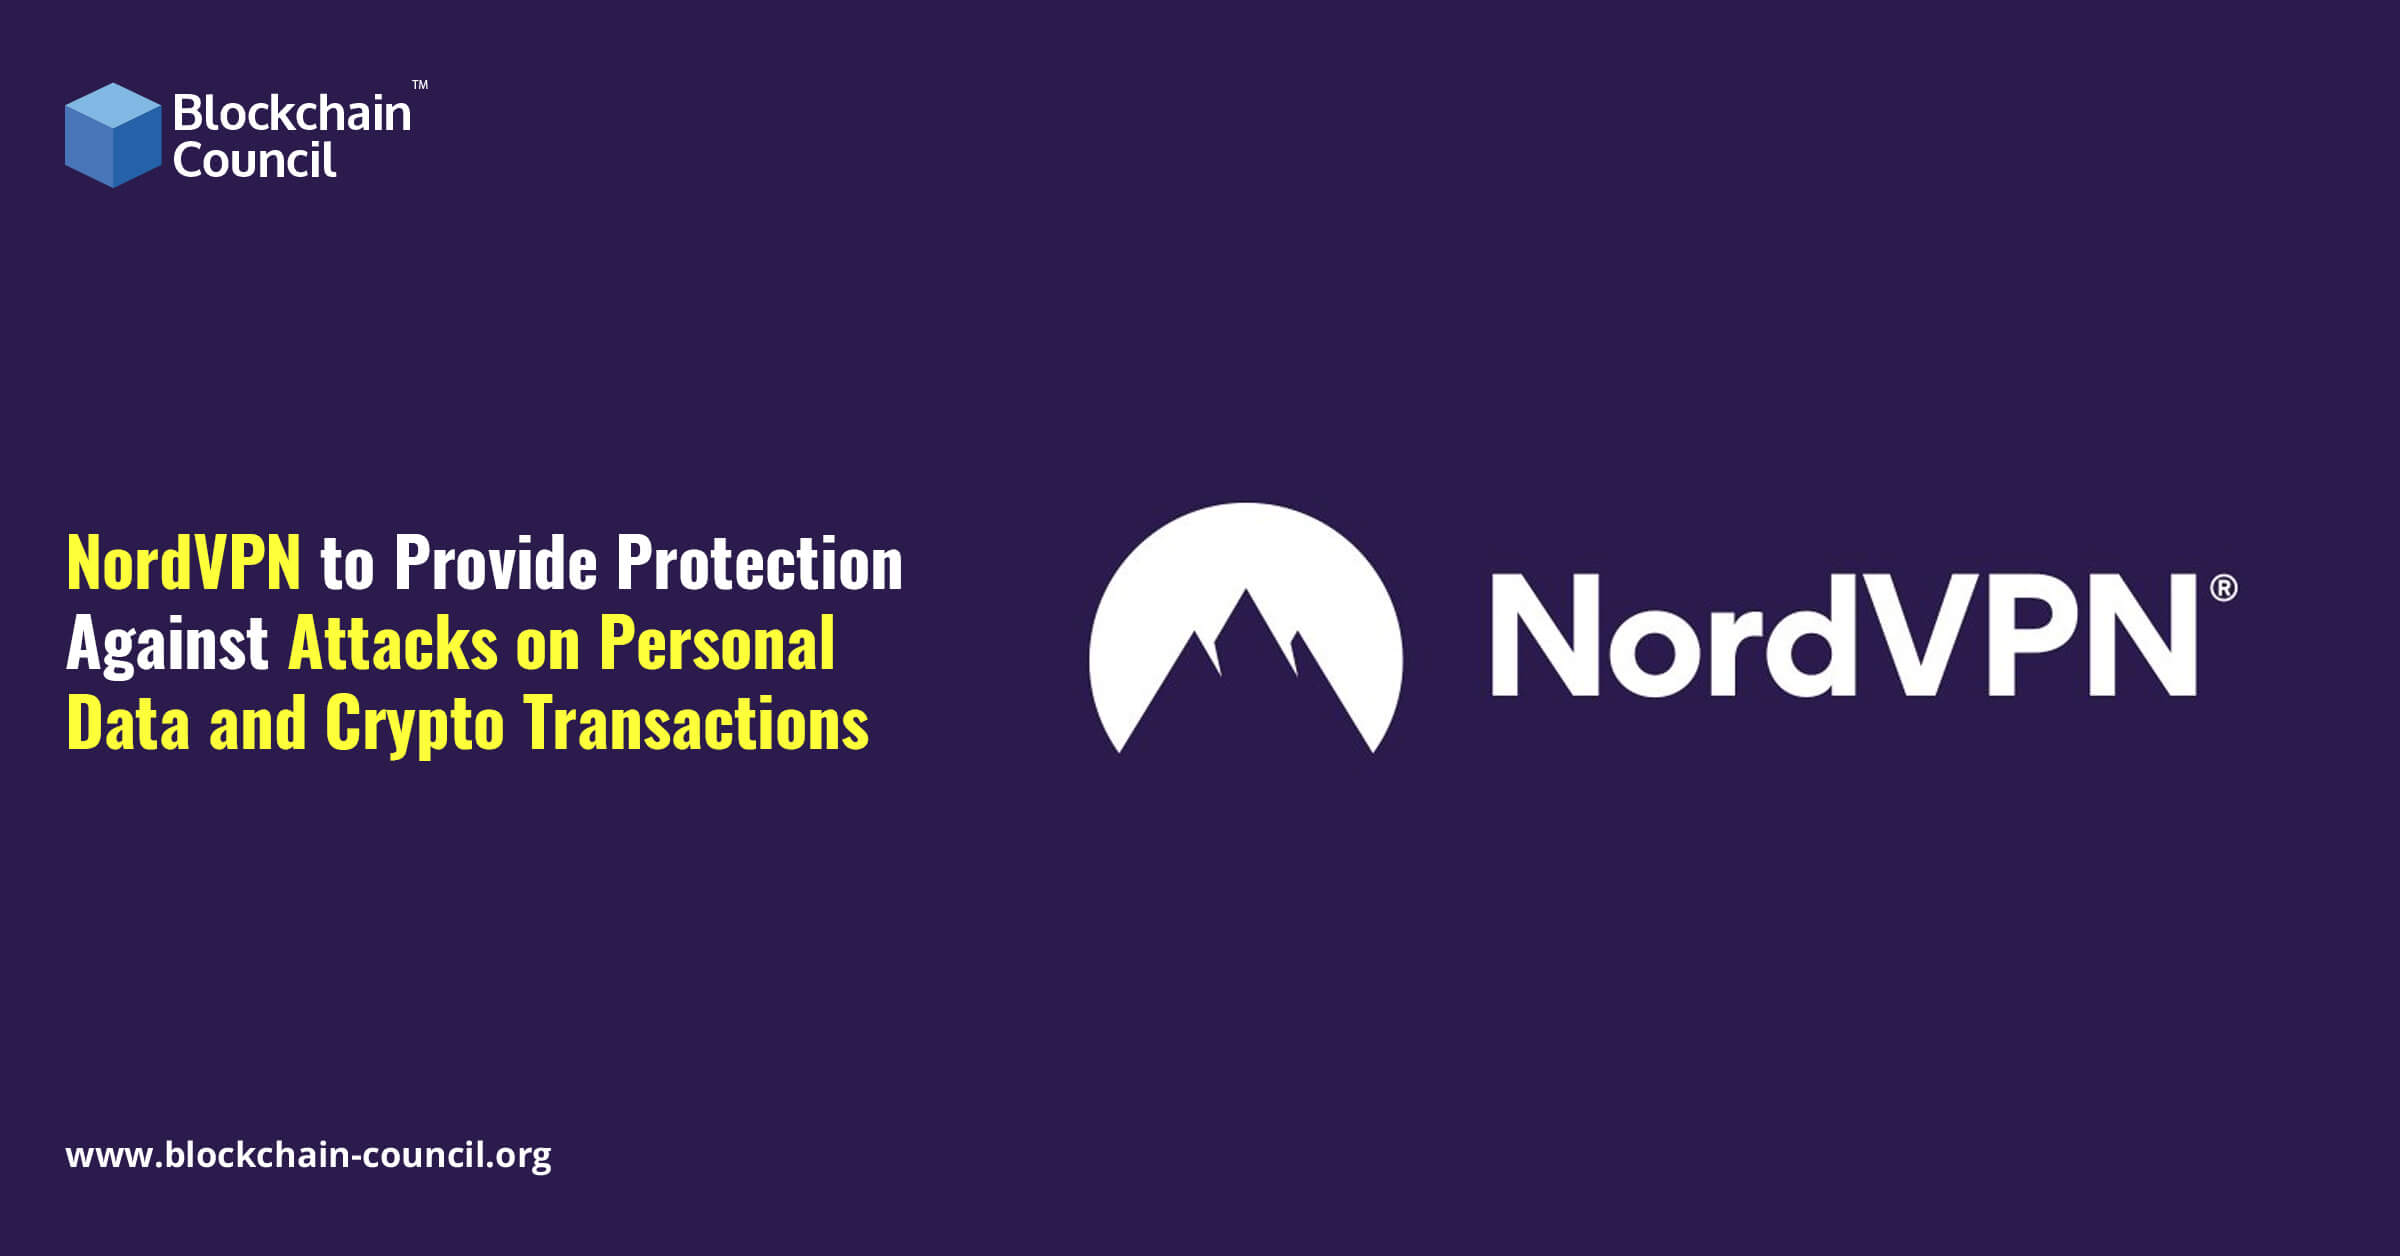 NordVPN to Provide Protection Against Attacks on Personal Data and Crypto Transactions